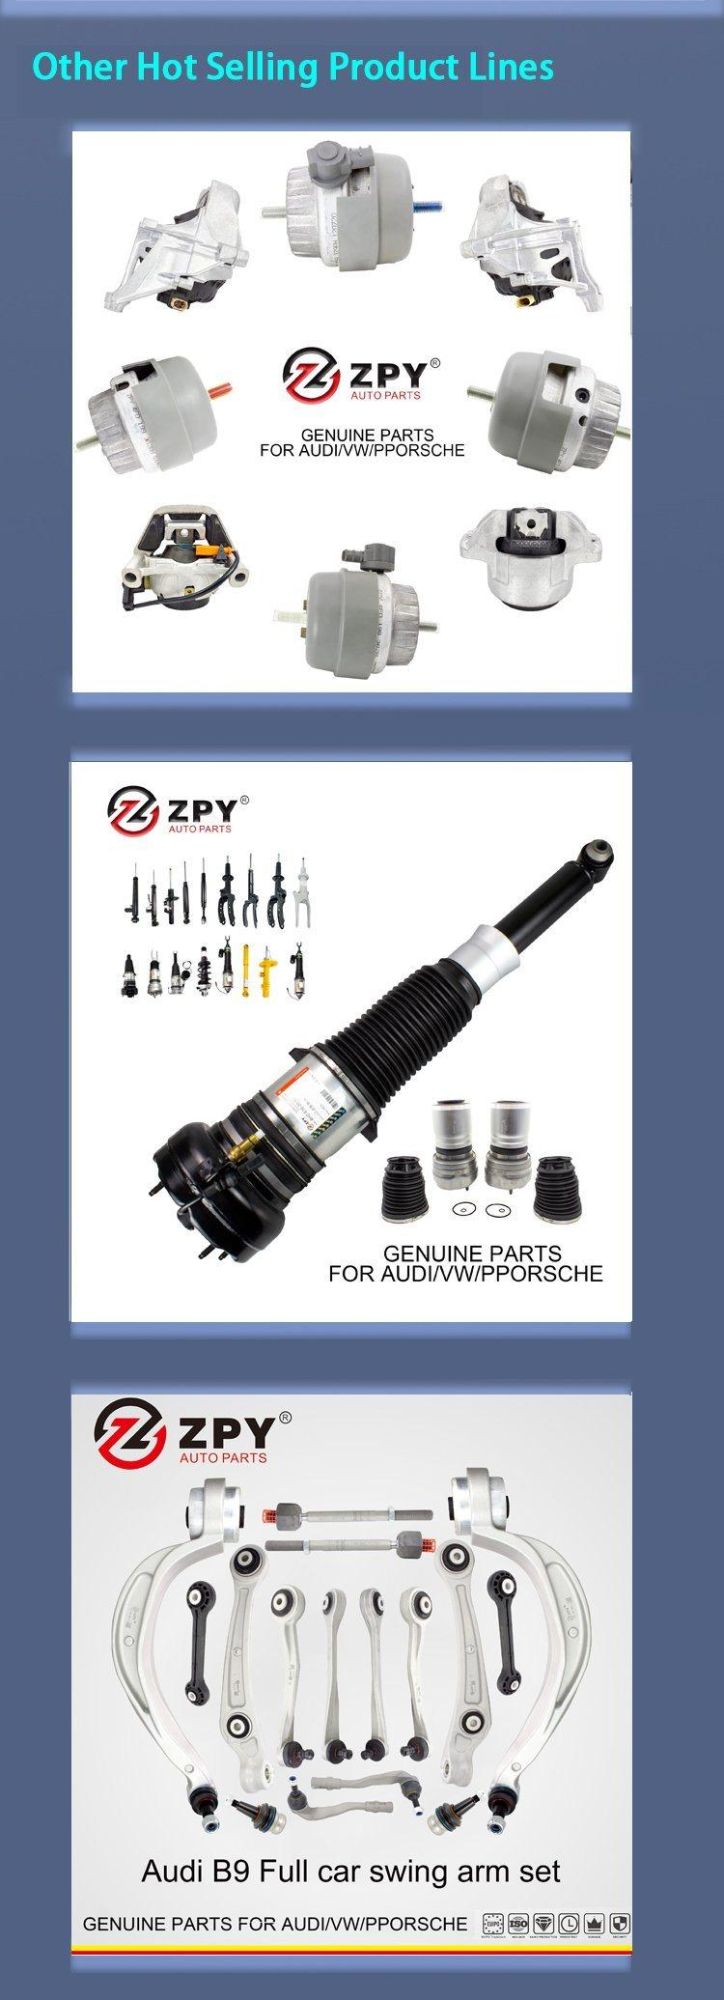 Zpy Auto Fitments Car Parts Right Rear Power Window Regulator for Audi A3 OE 8vd 839 462 8vd839462